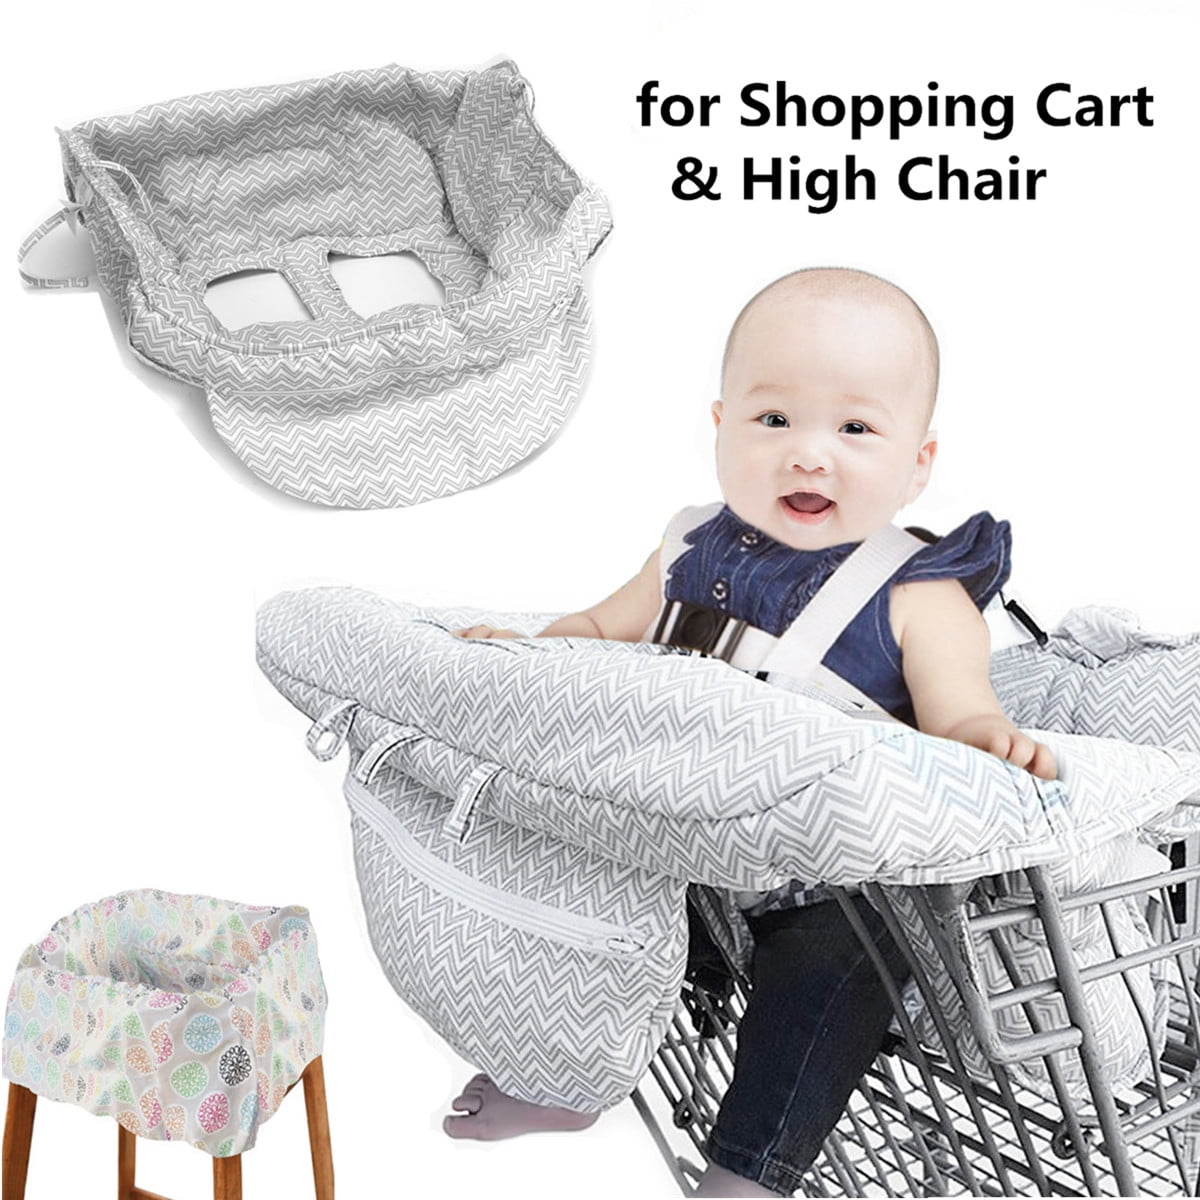 Starnight Black UNKU Multifunctional 2-in-1 Shopping Cart Seat Cover High Chair Cover for Baby & Infant